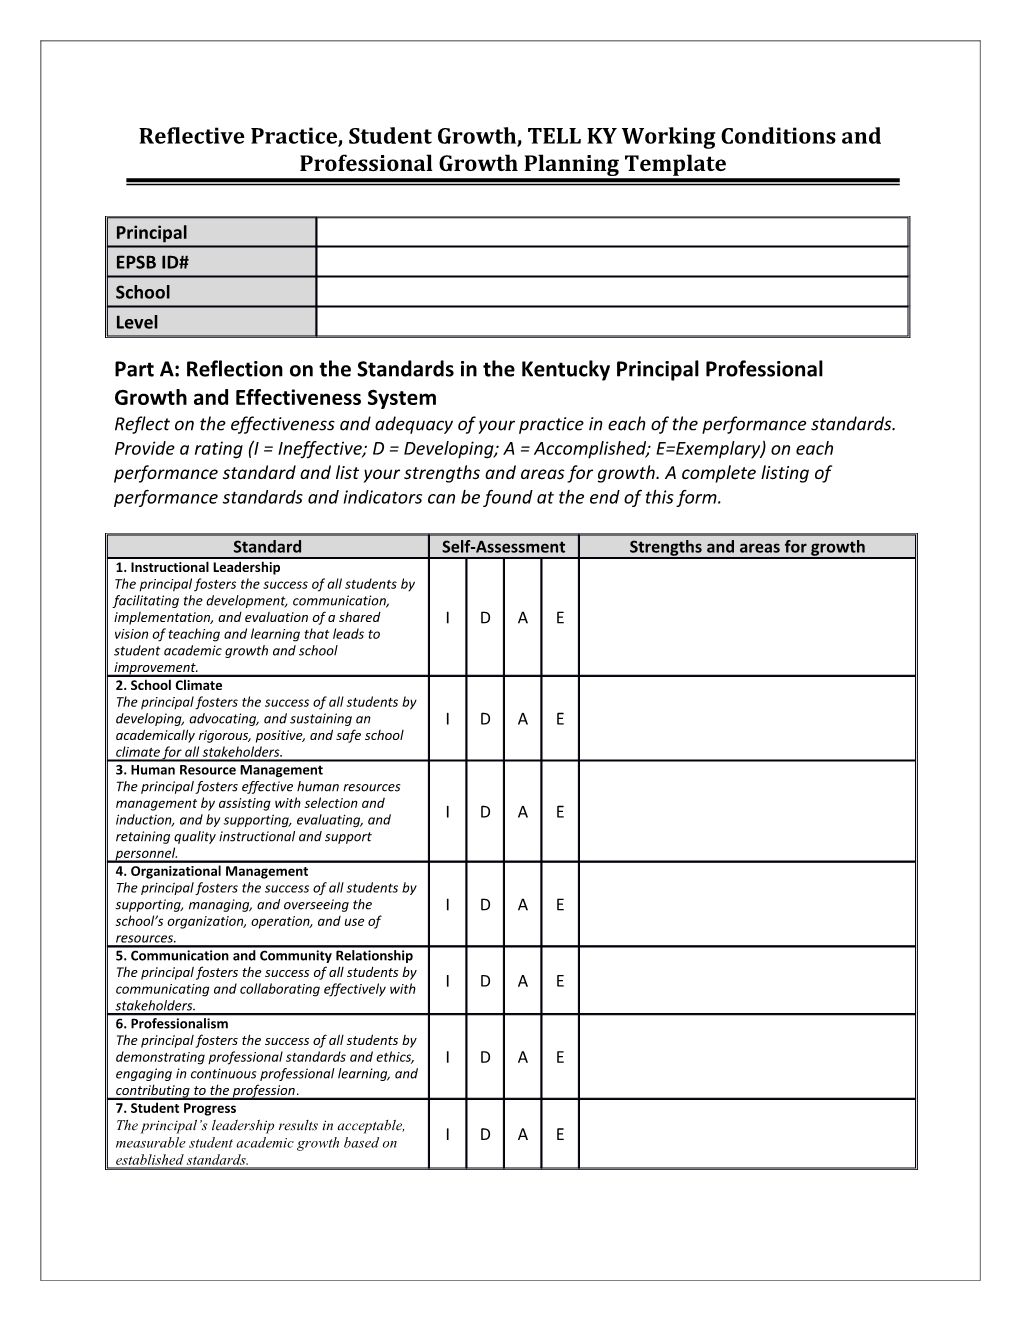 Principal Reflective Practice Student Growth and Professional Growth Planning Template s2